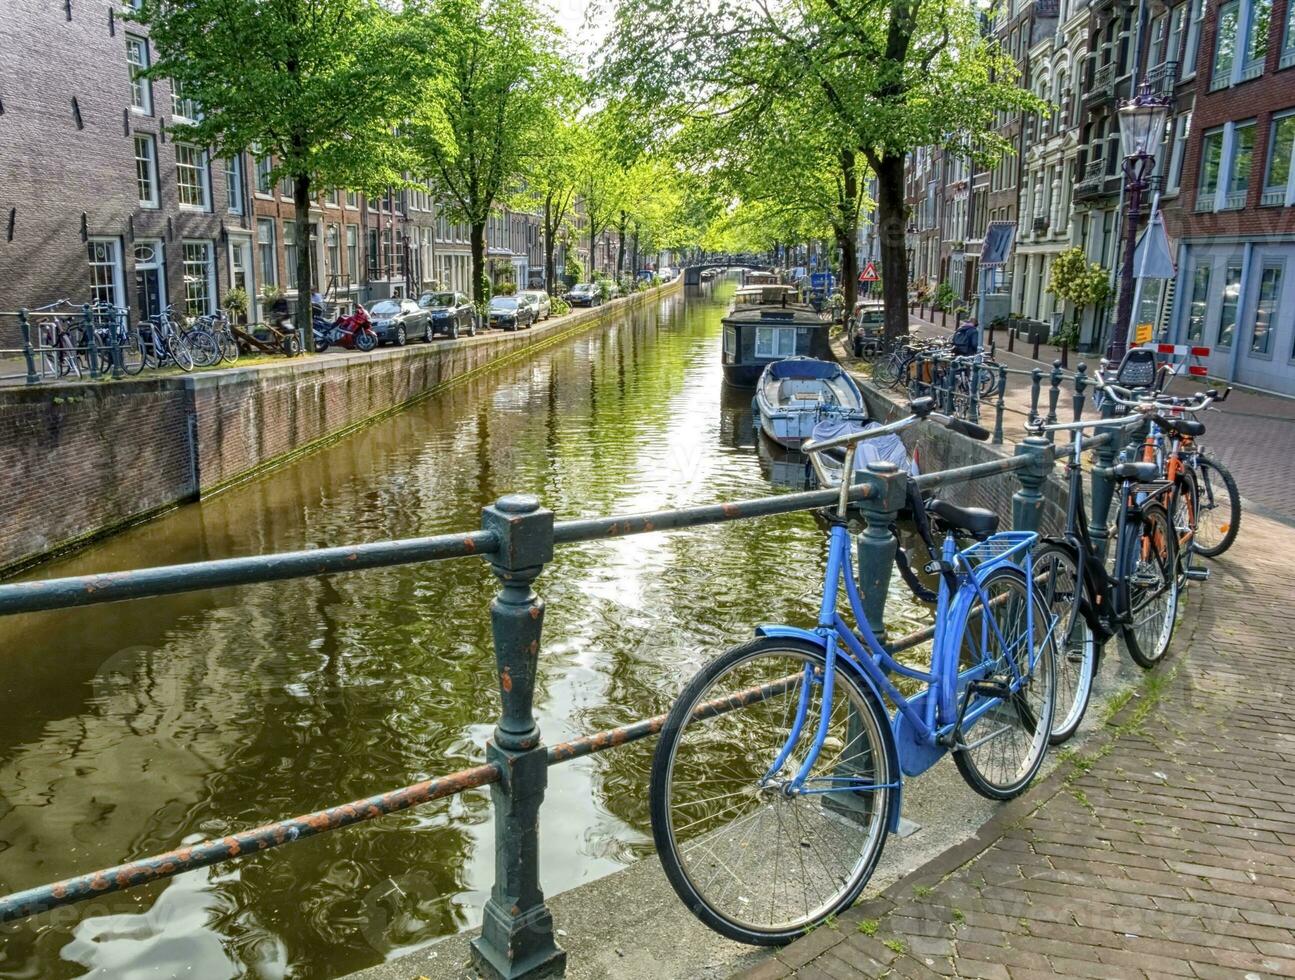 Typical canal and bikes in Amsterdam, Netherlands photo